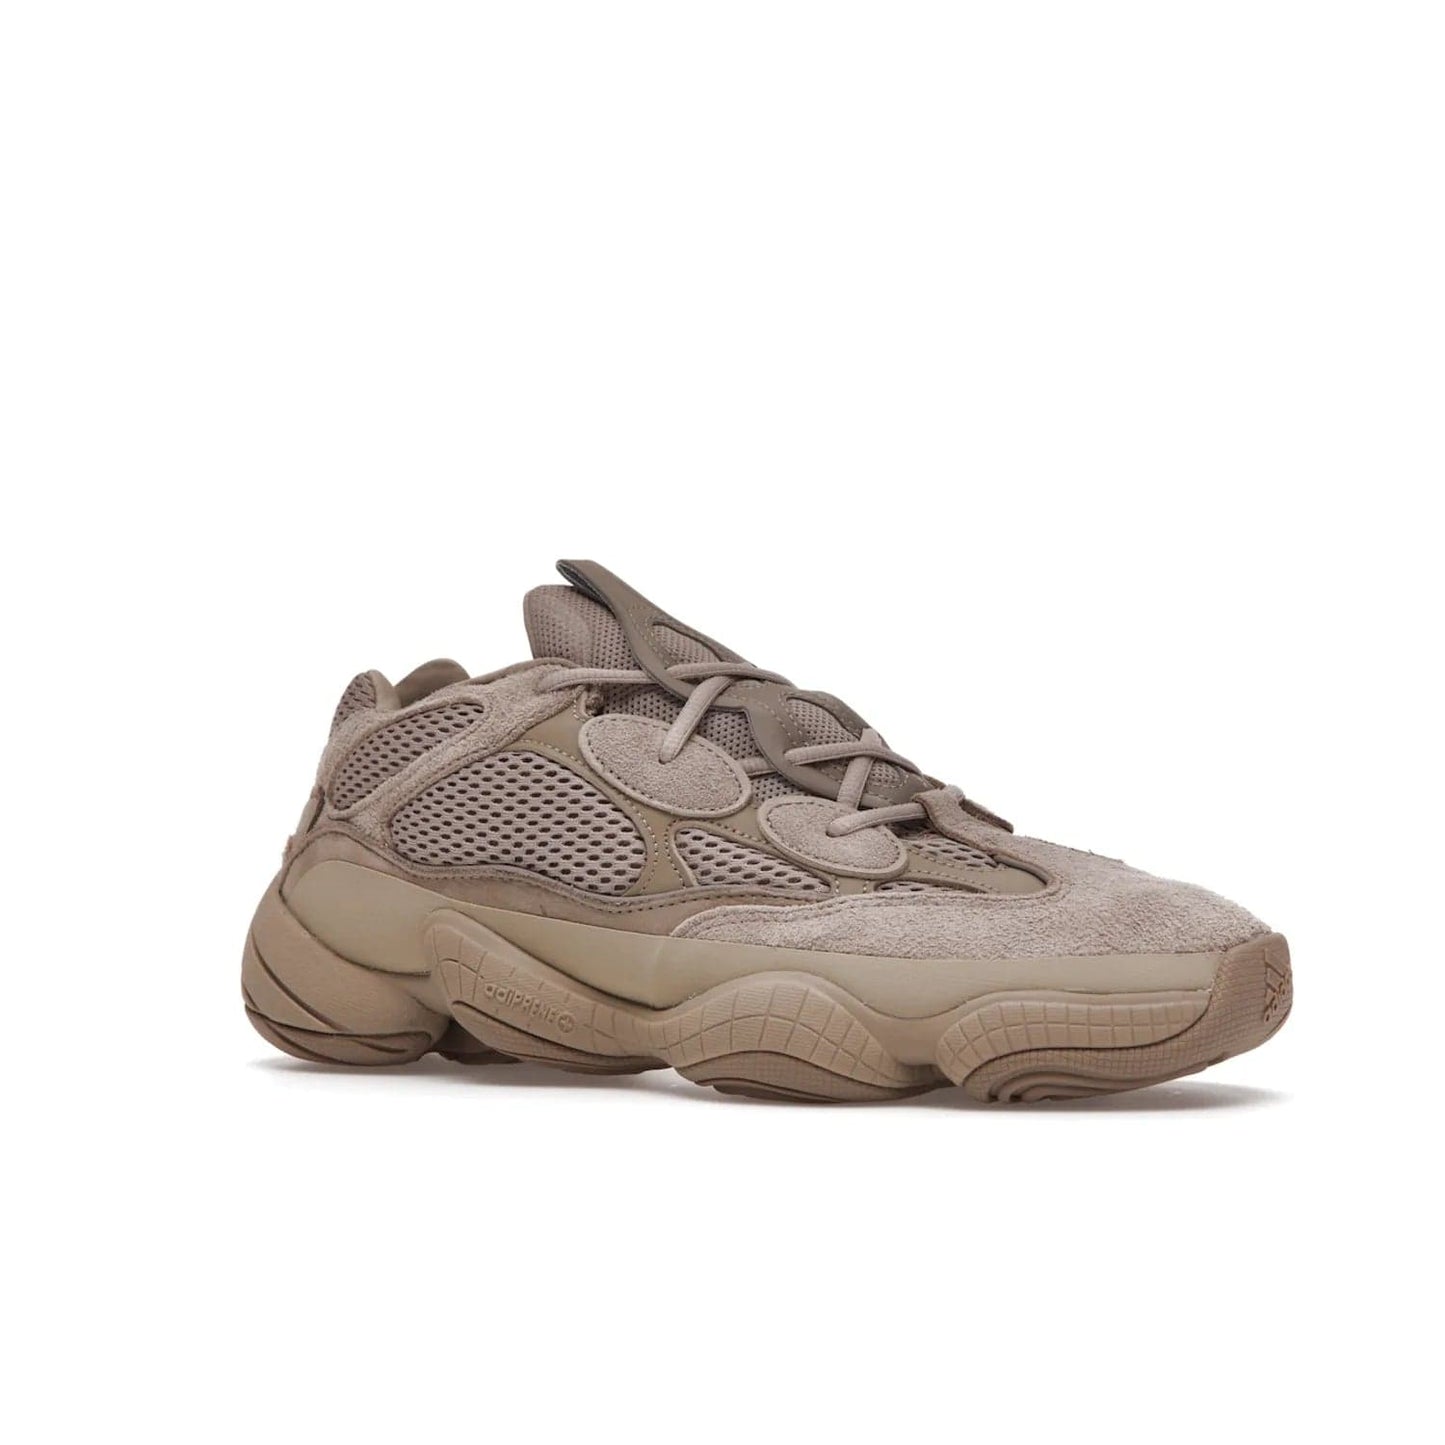 adidas Yeezy 500 Taupe Light - Image 4 - Only at www.BallersClubKickz.com - The adidas Yeezy 500 Taupe Light combines mesh, leather, and suede, with a durable adiPRENE sole for an eye-catching accessory. Reflective piping adds the perfect finishing touches to this unique silhouette. Ideal for any wardrobe, releasing in June 2021.